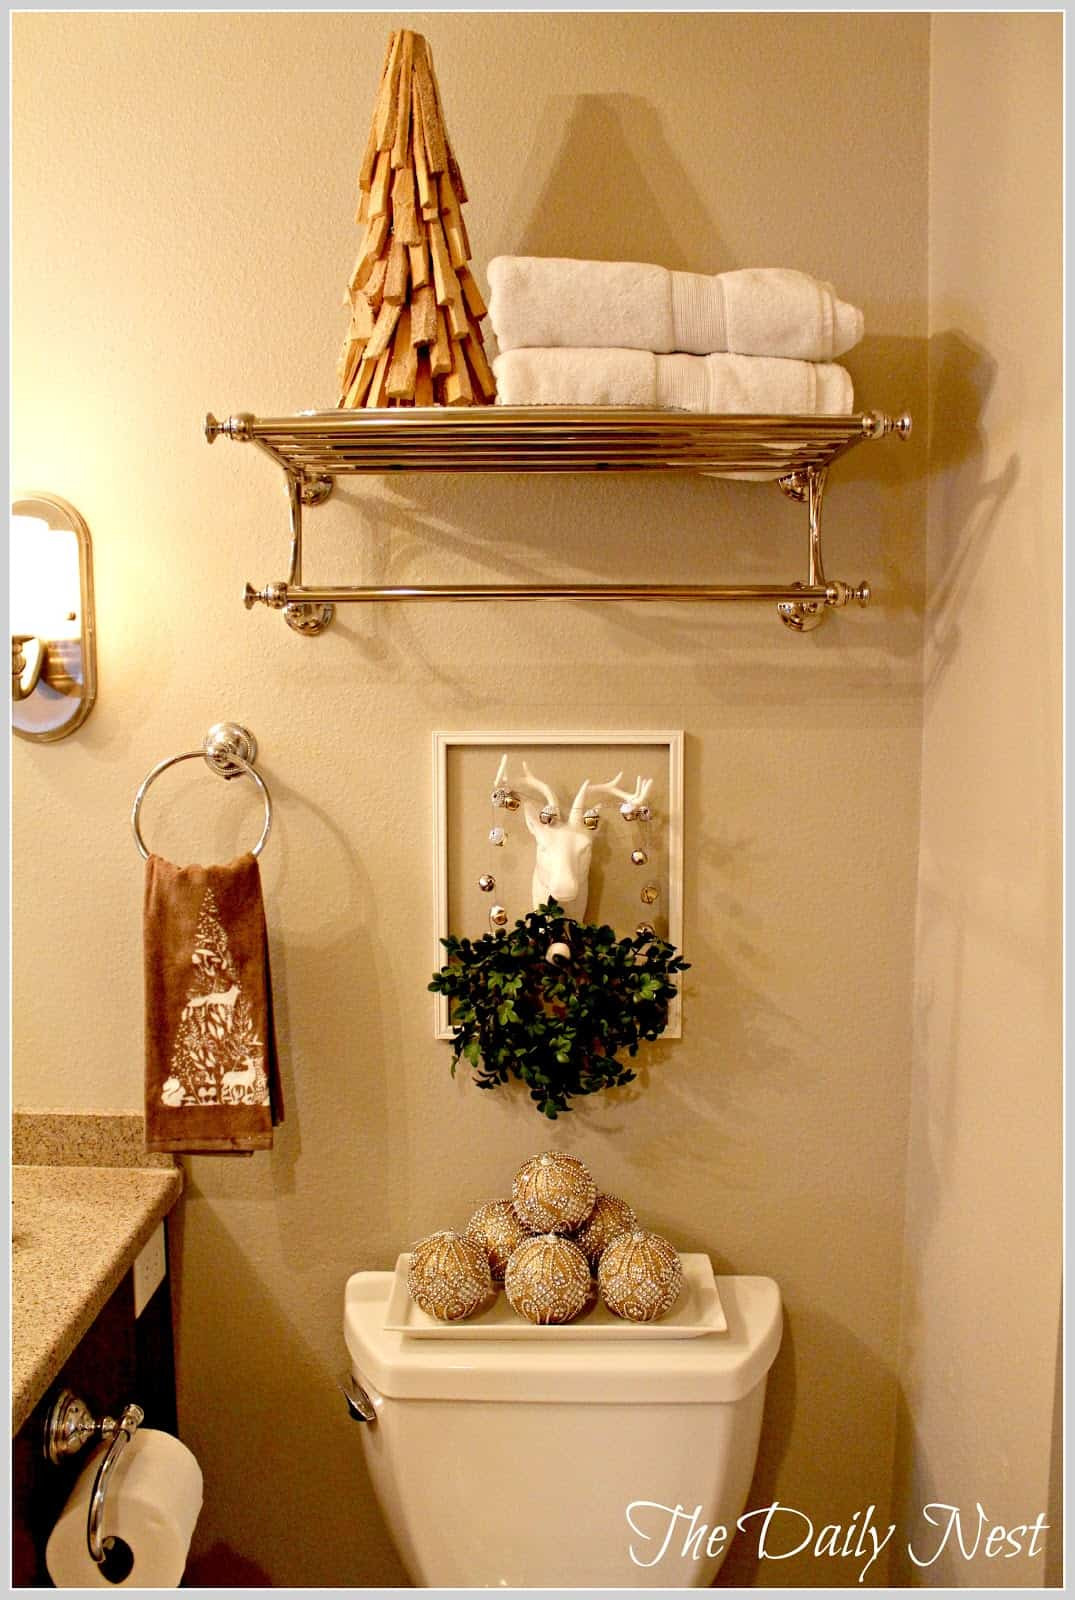 Home Goods Bathroom Decor
 21 Awesomely Unexpected Christmas Bathroom Decorations To